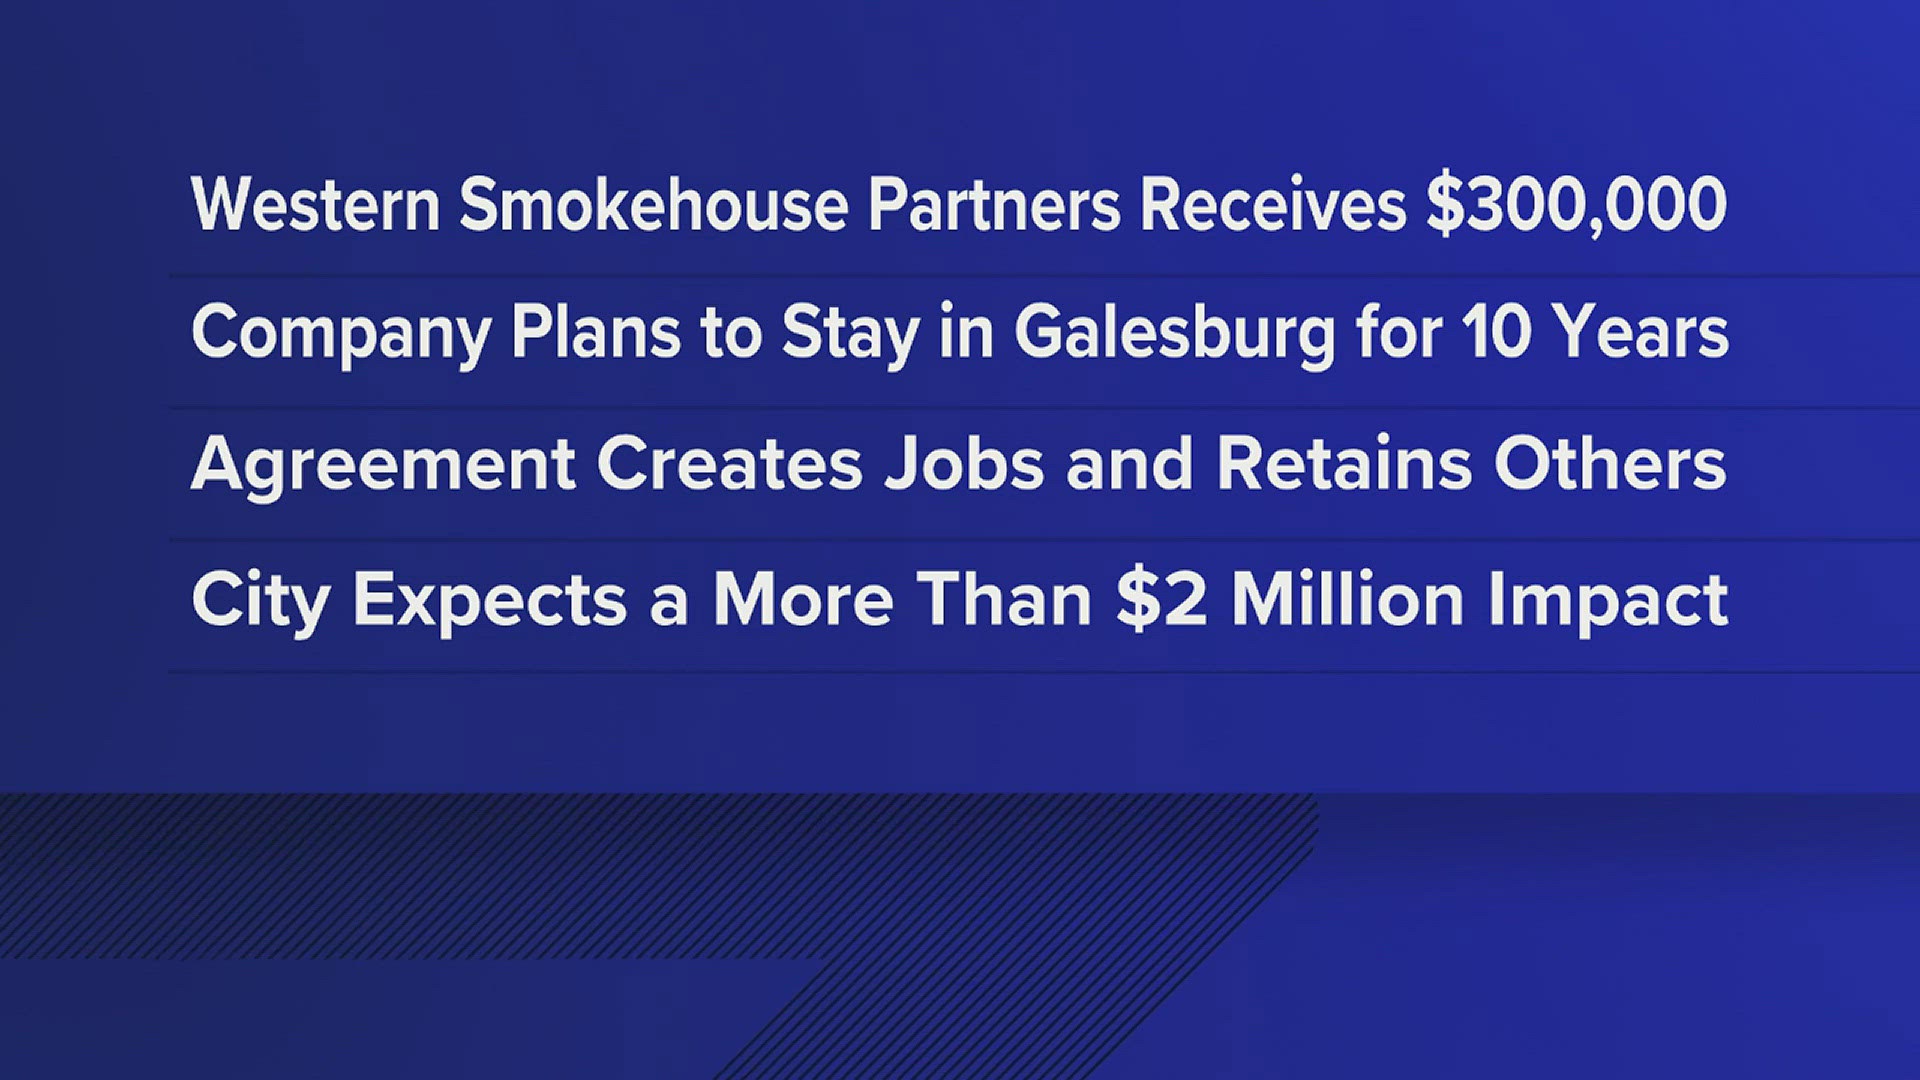 The company agreed to stay in Galesburg for 10 years.